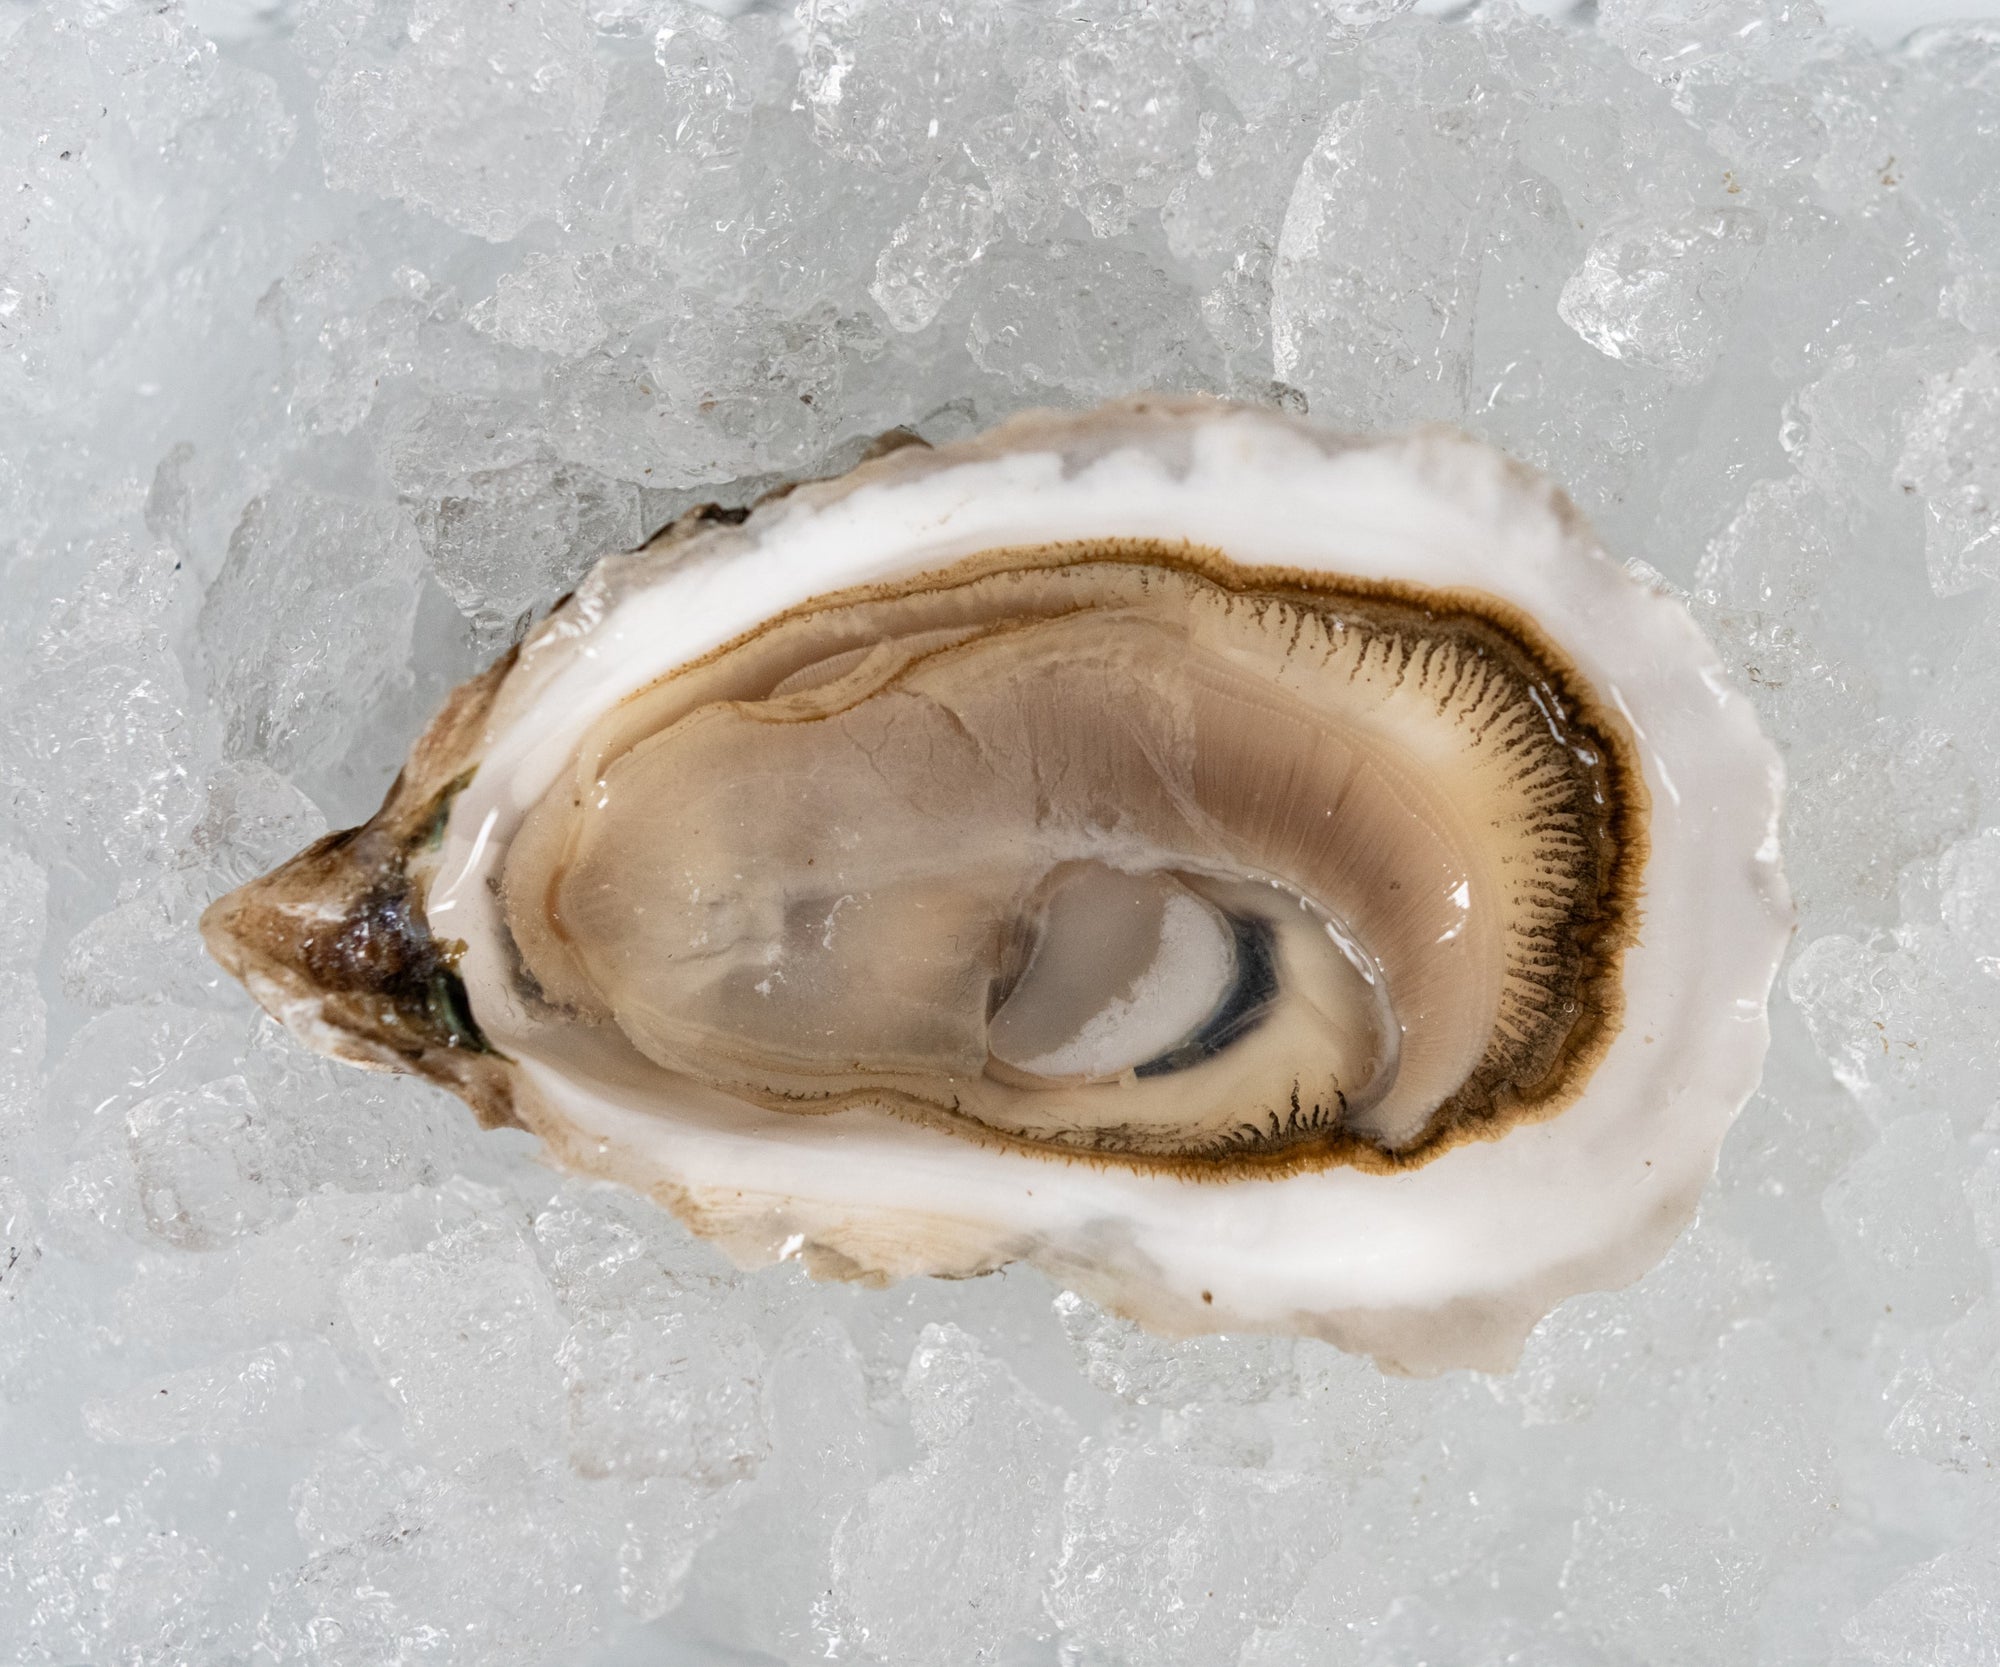 Chebeague Island Oysters from Casco Bay, ME